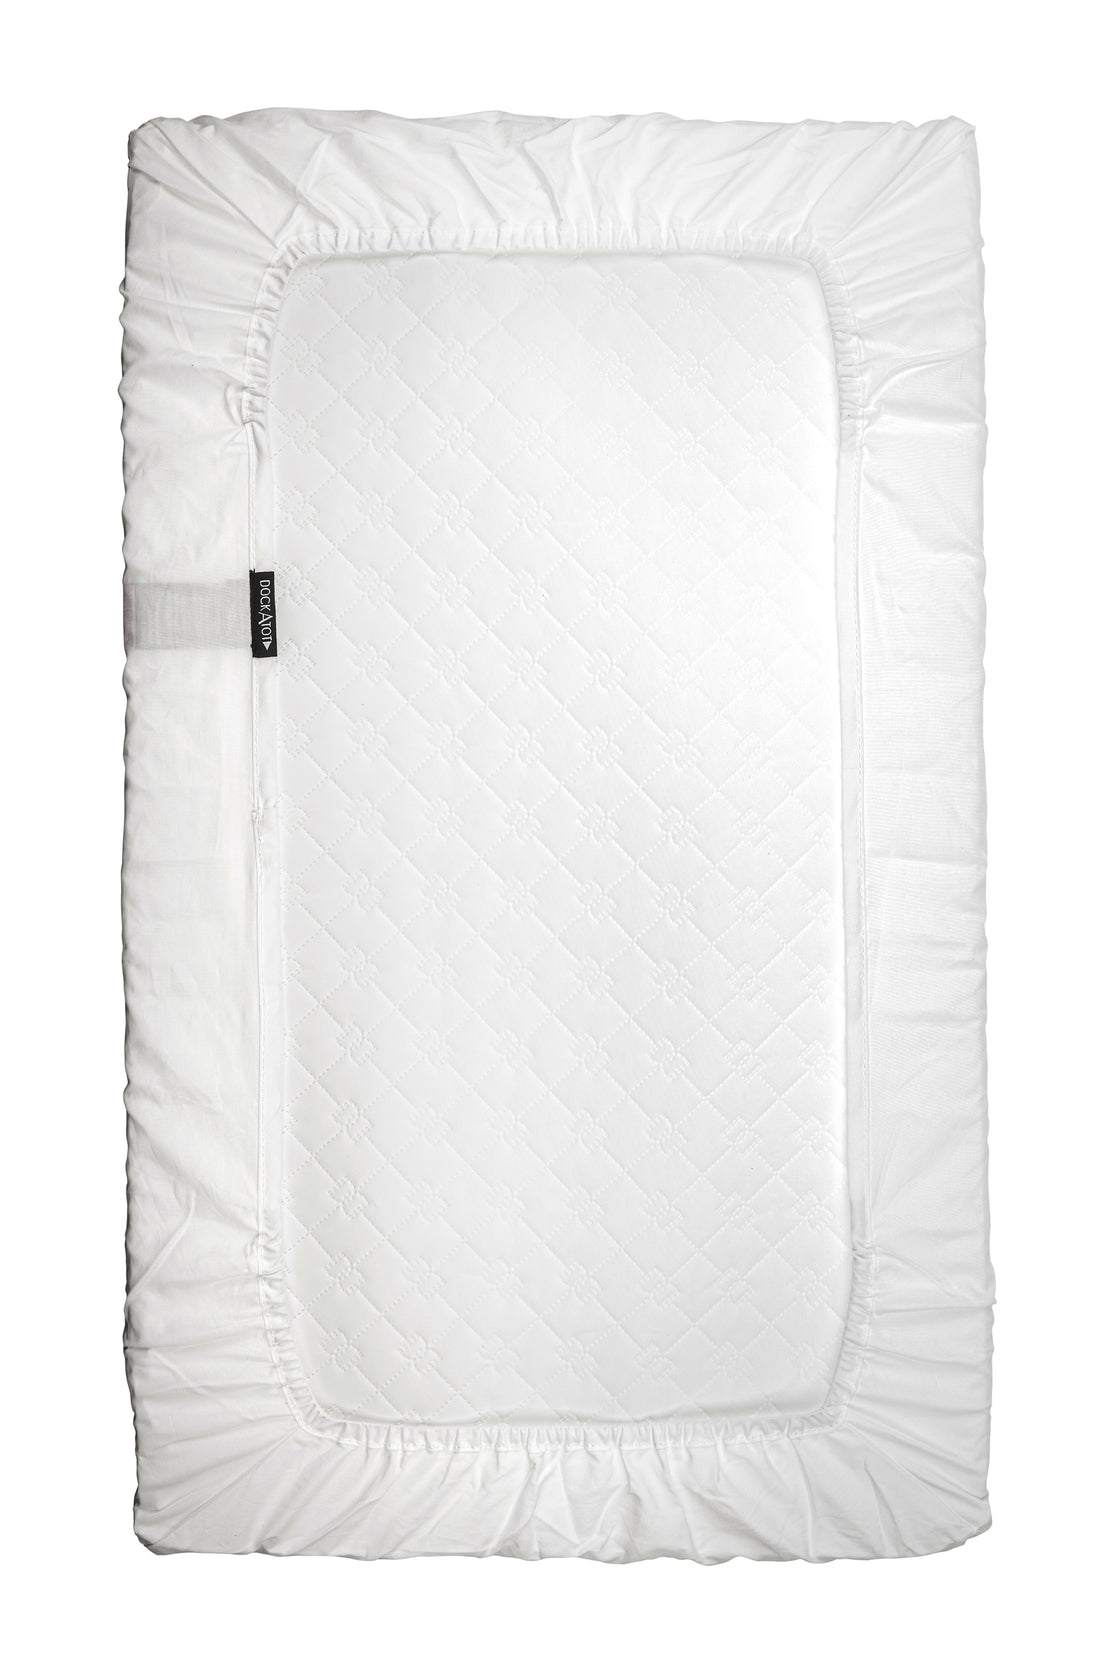 White quilted Kind Essential Bassinet fitted sheet by DockATot with a distinct perimeter border and a side zipper, made from safe bassinet fabric, placed against a plain background.